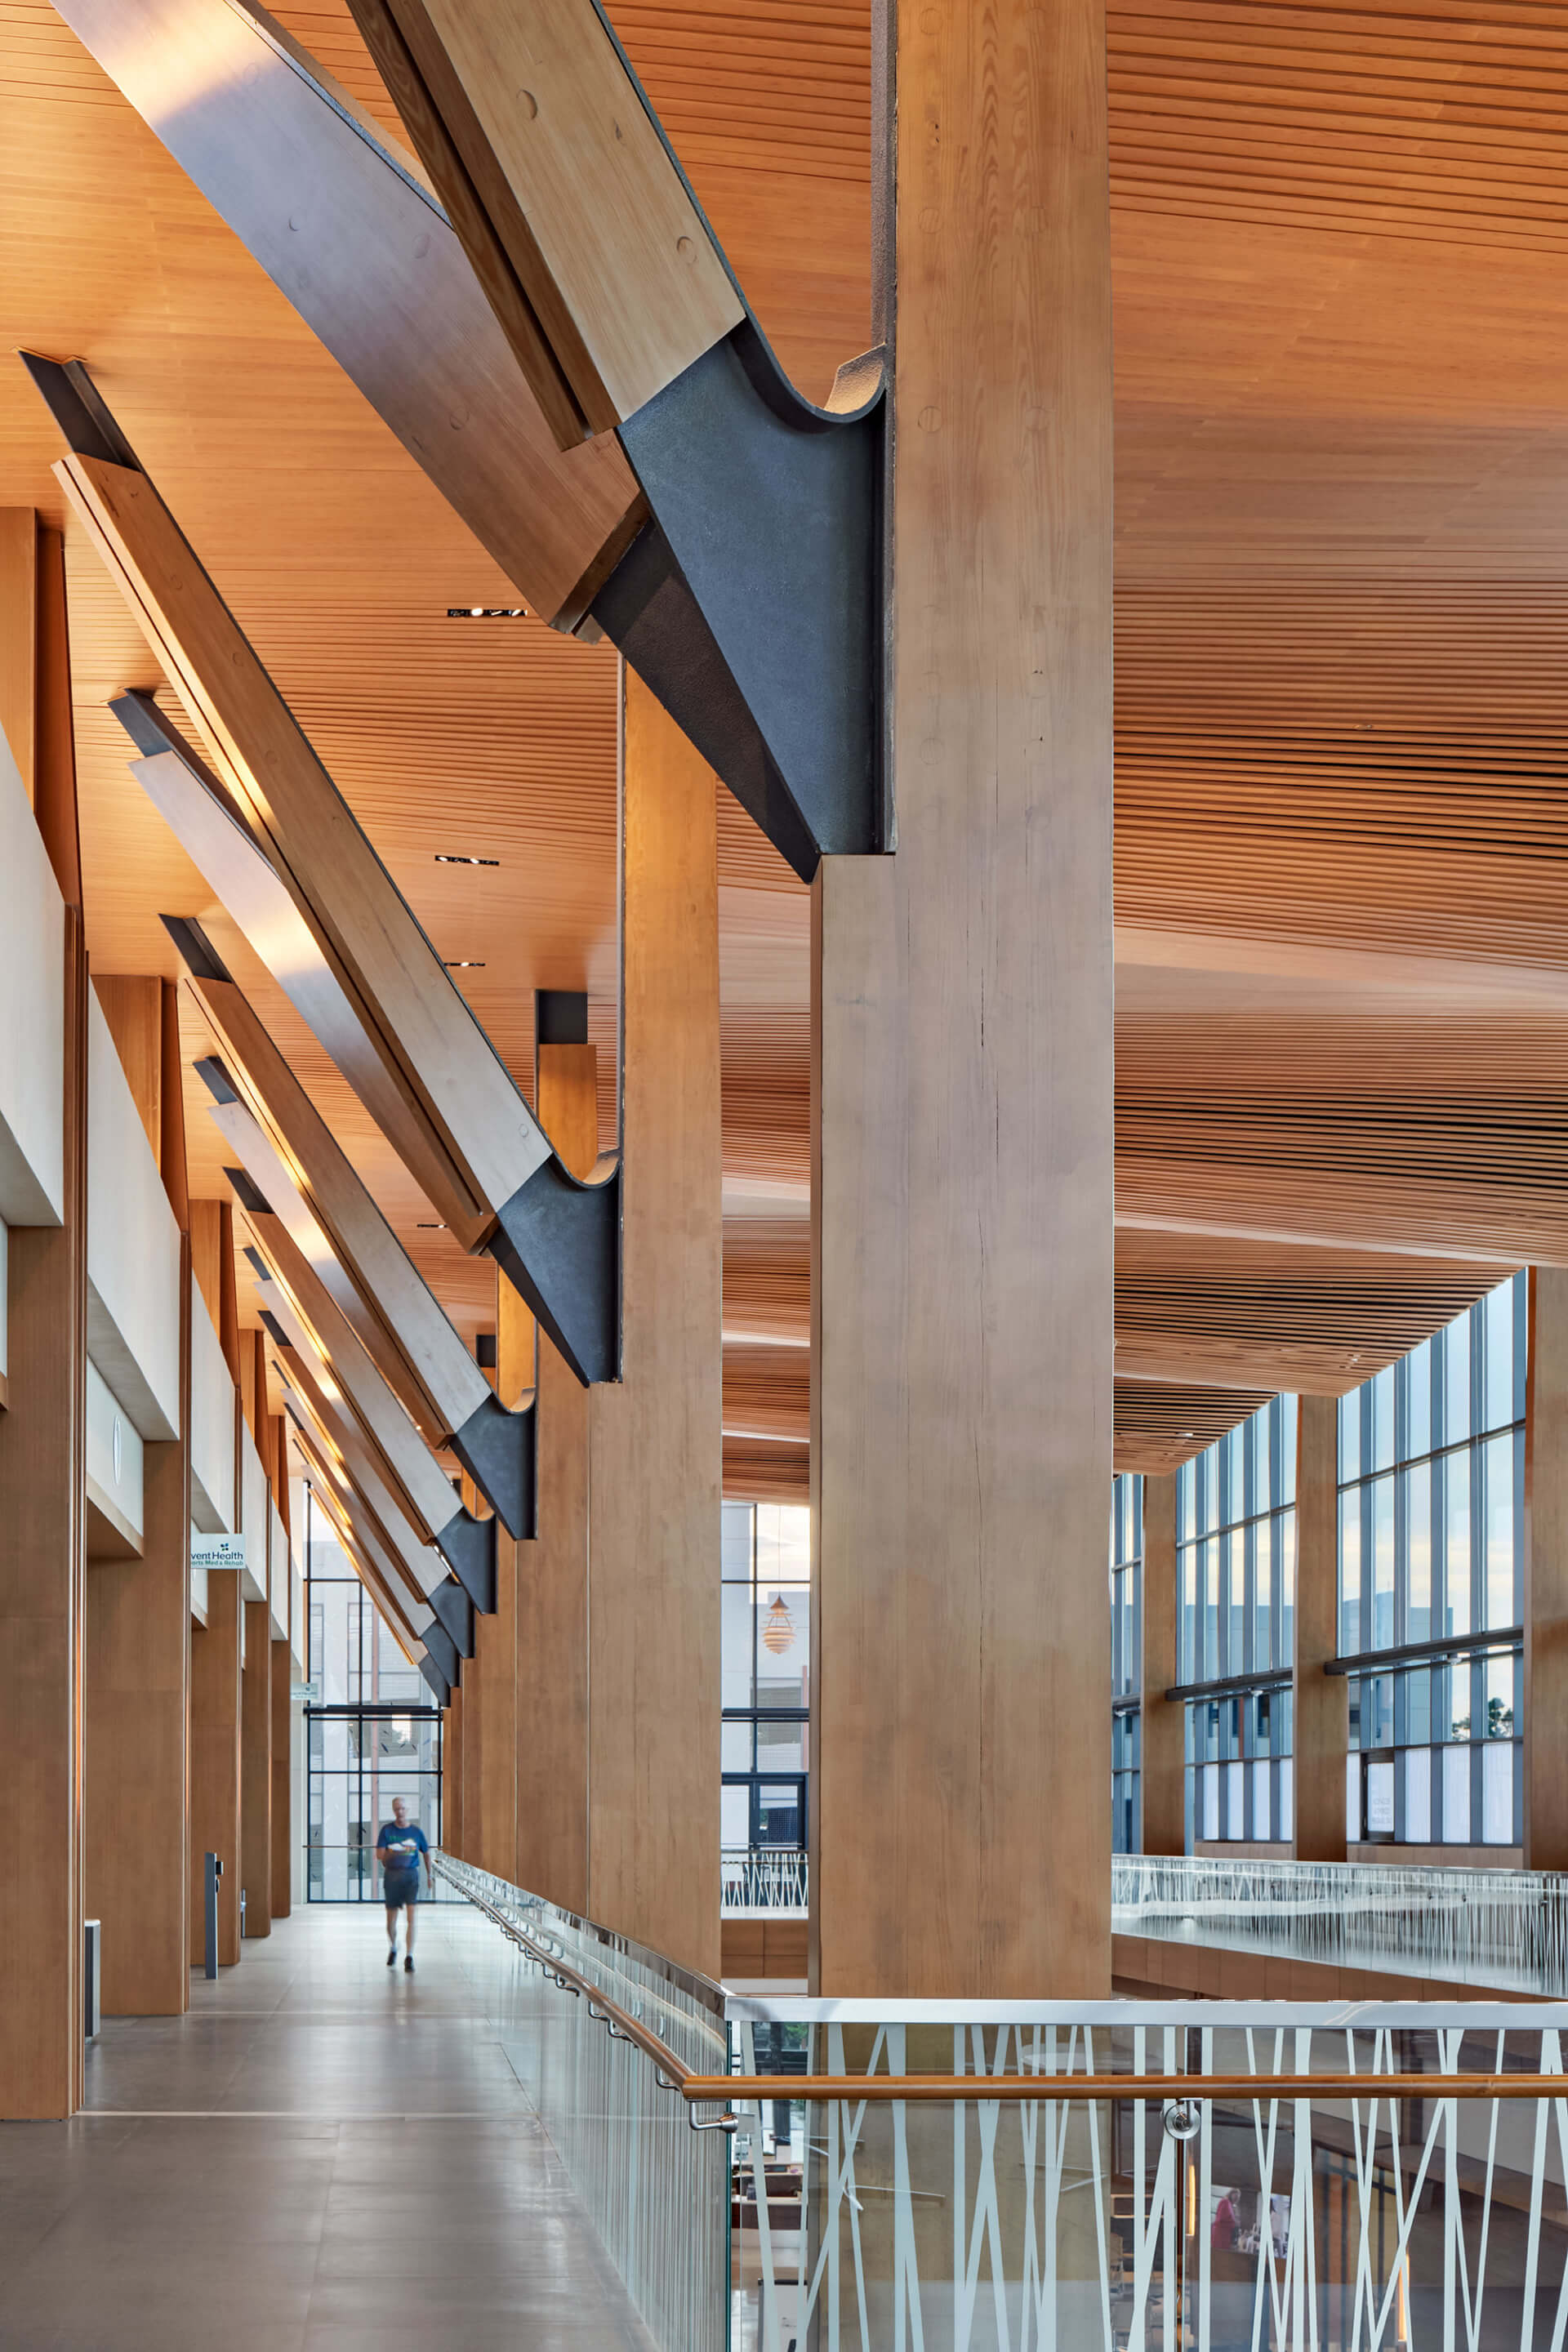 Interior of a health center supported by massive timber columns running through an atrium